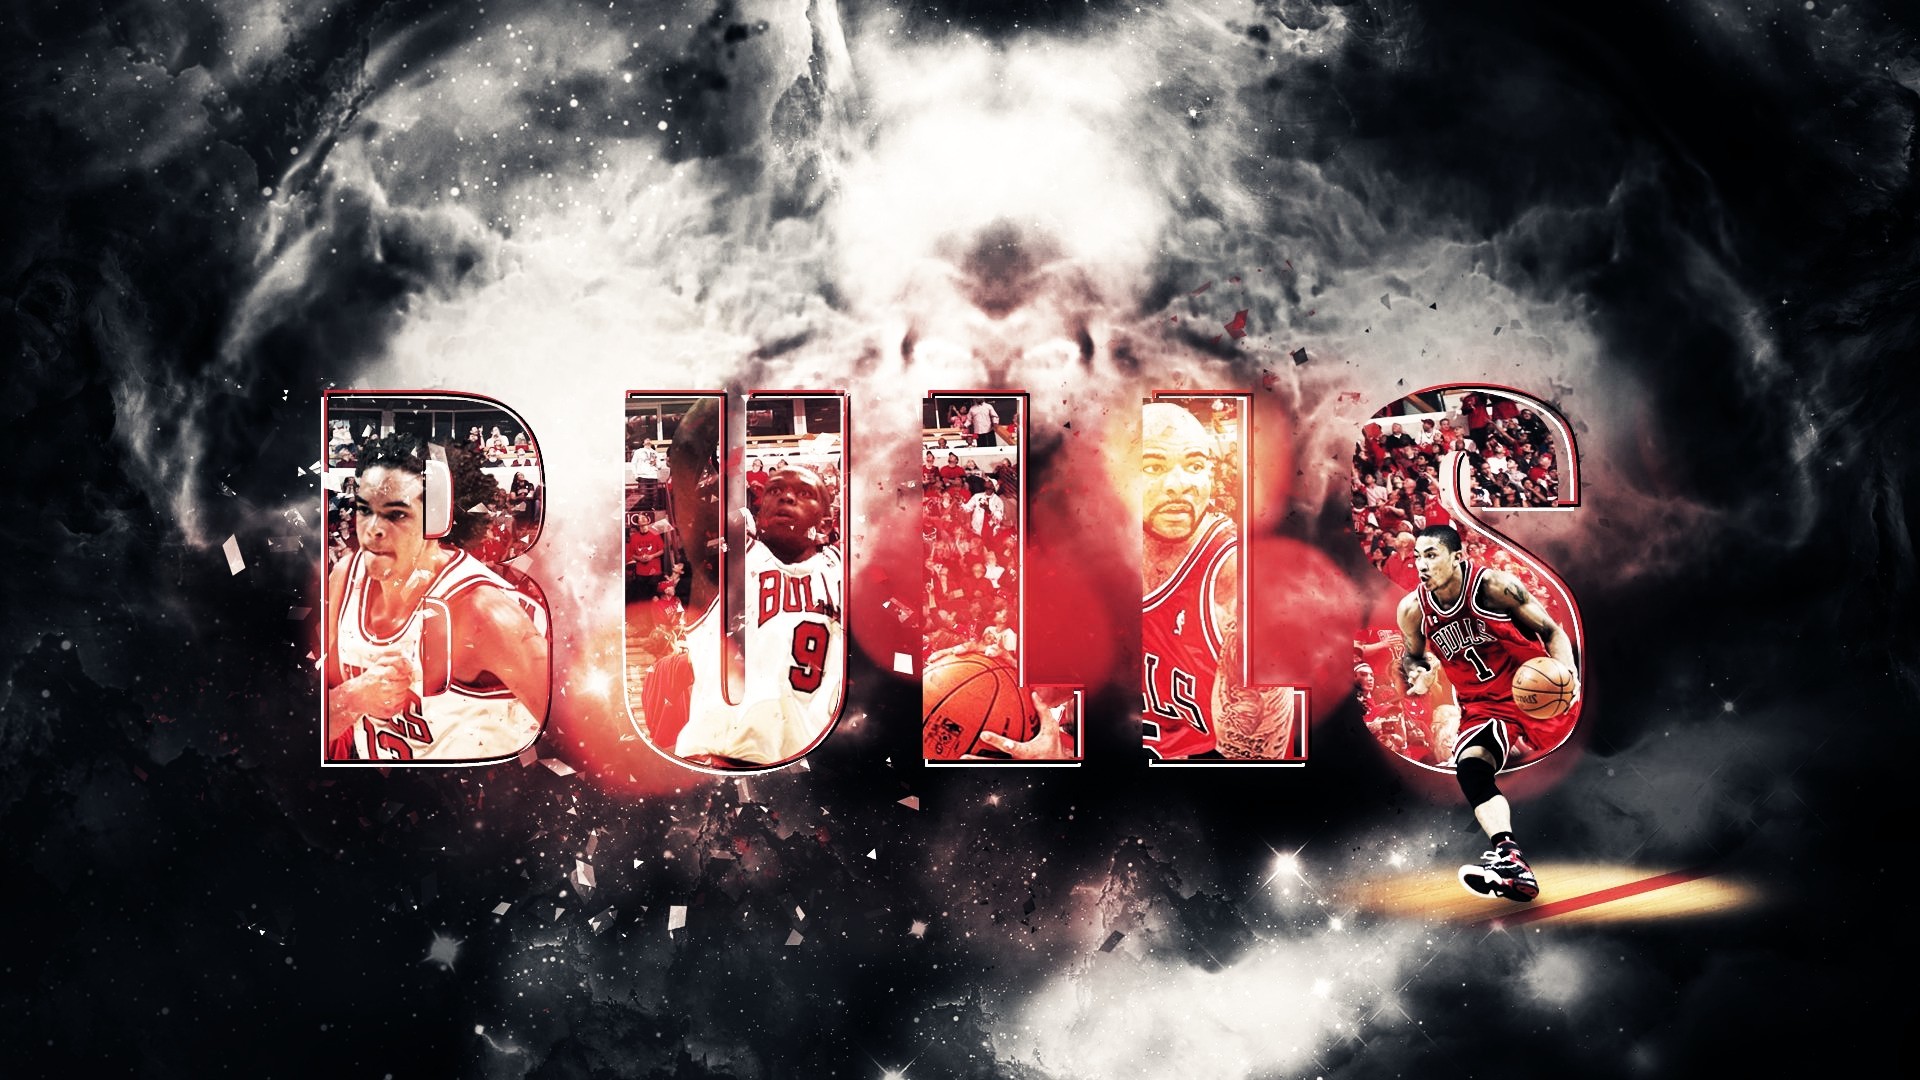 1920x1080 Chicago Bulls Wallpaper Collection For Free Download